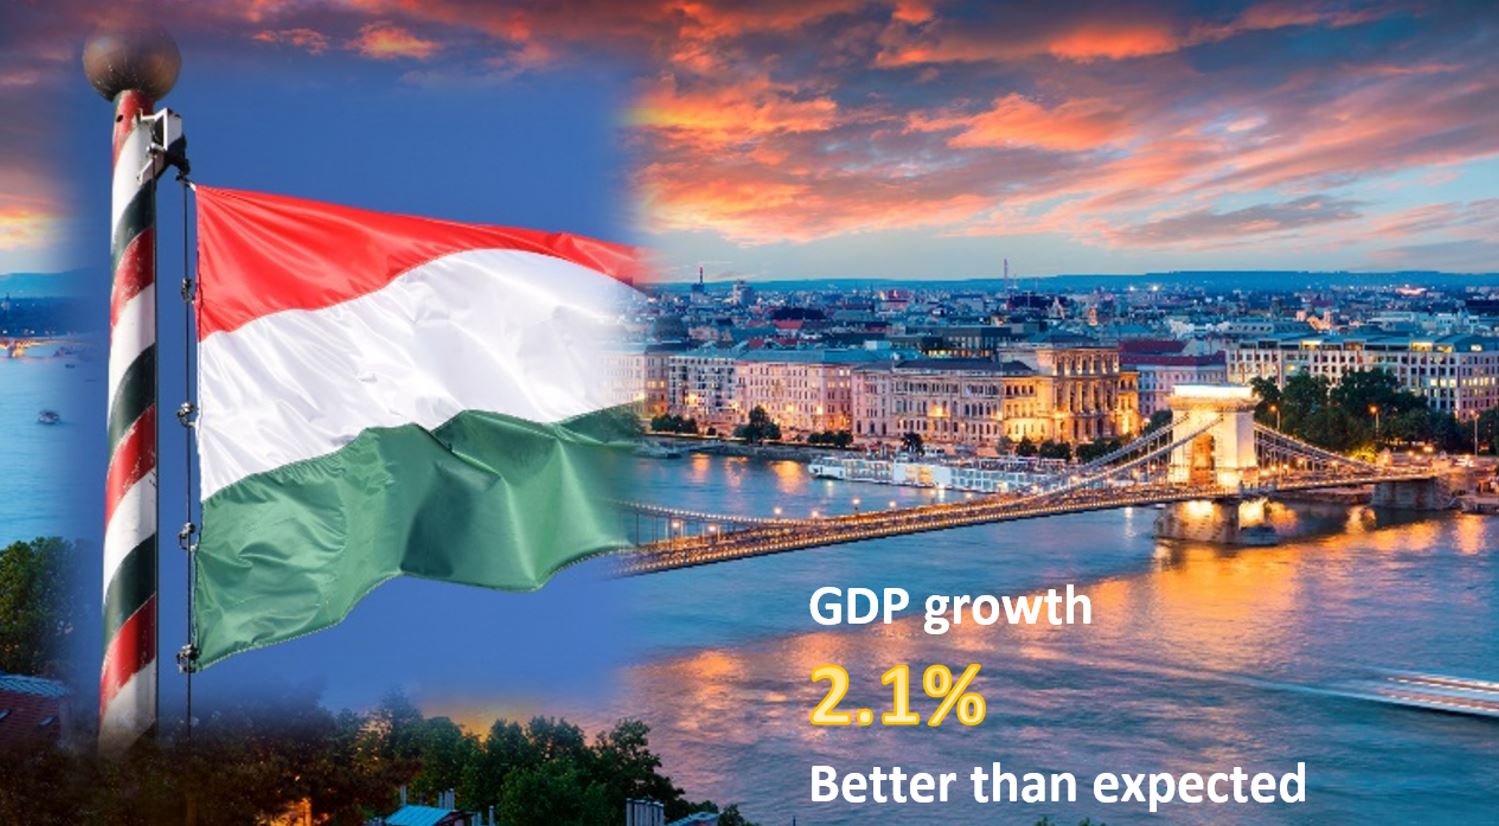 GREAT SURPRISE OF HUNGARY GDP GROWTH – HUNGARY GDP GROWTH 7.1% IN 2021